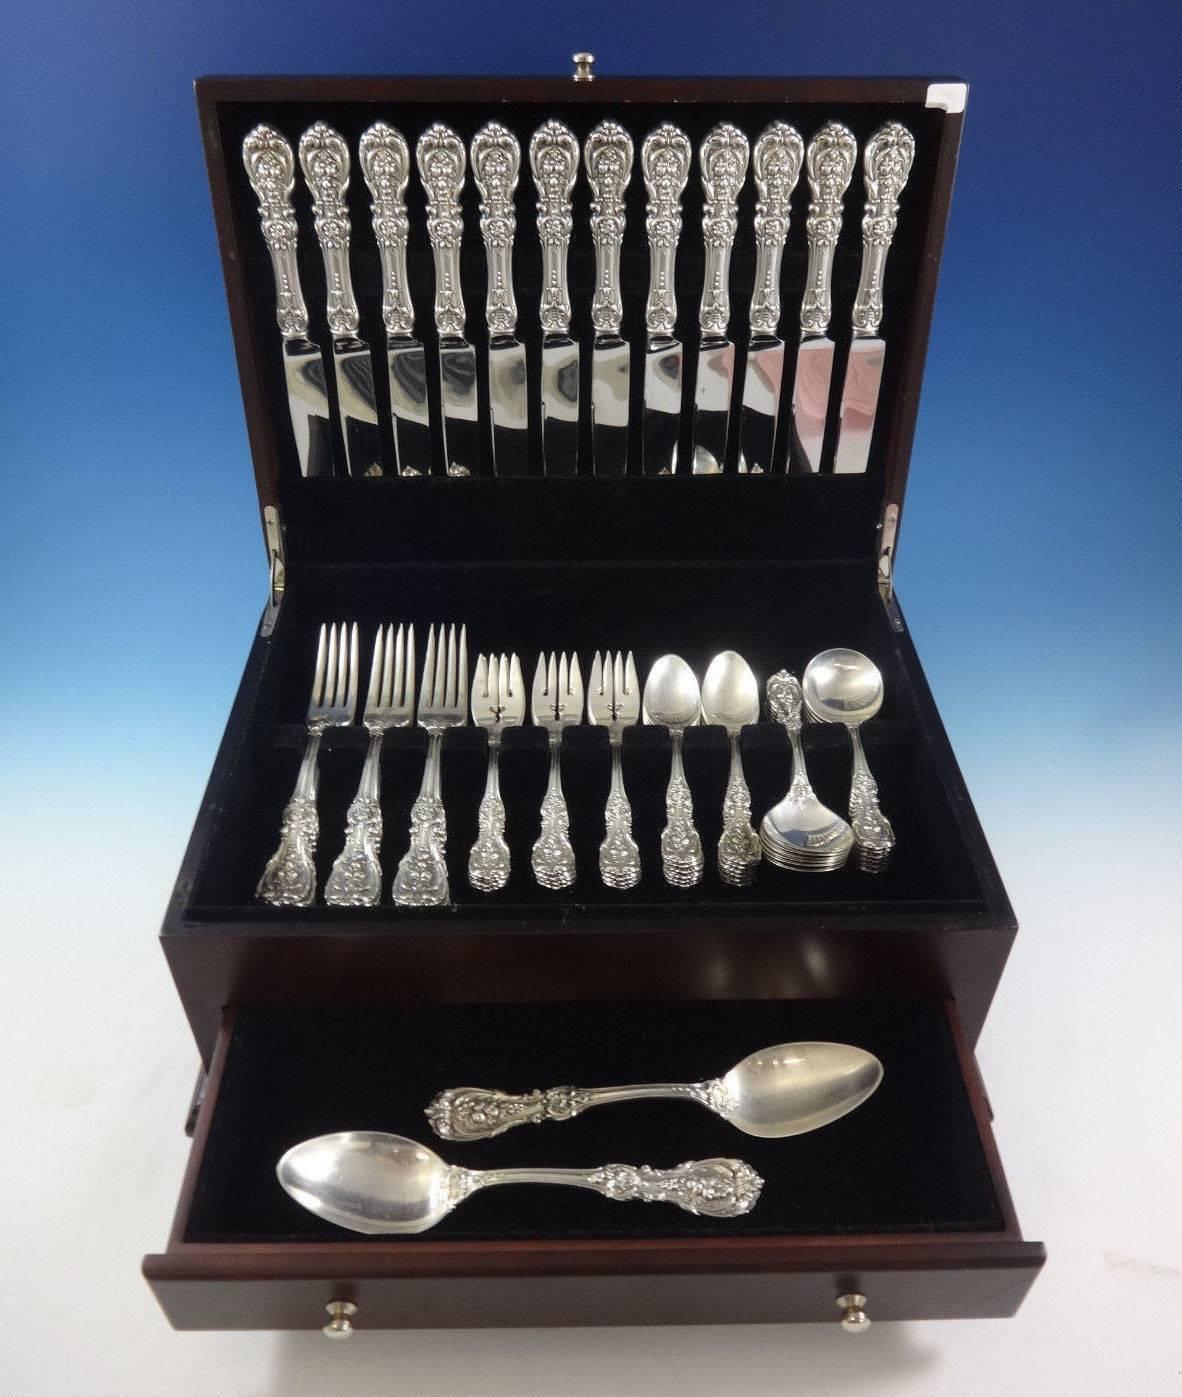 Dinner size Francis I Old by Reed & Barton sterling silver flatware set, 62 pieces. This set includes: 12 dinner size knives, 9 3/4